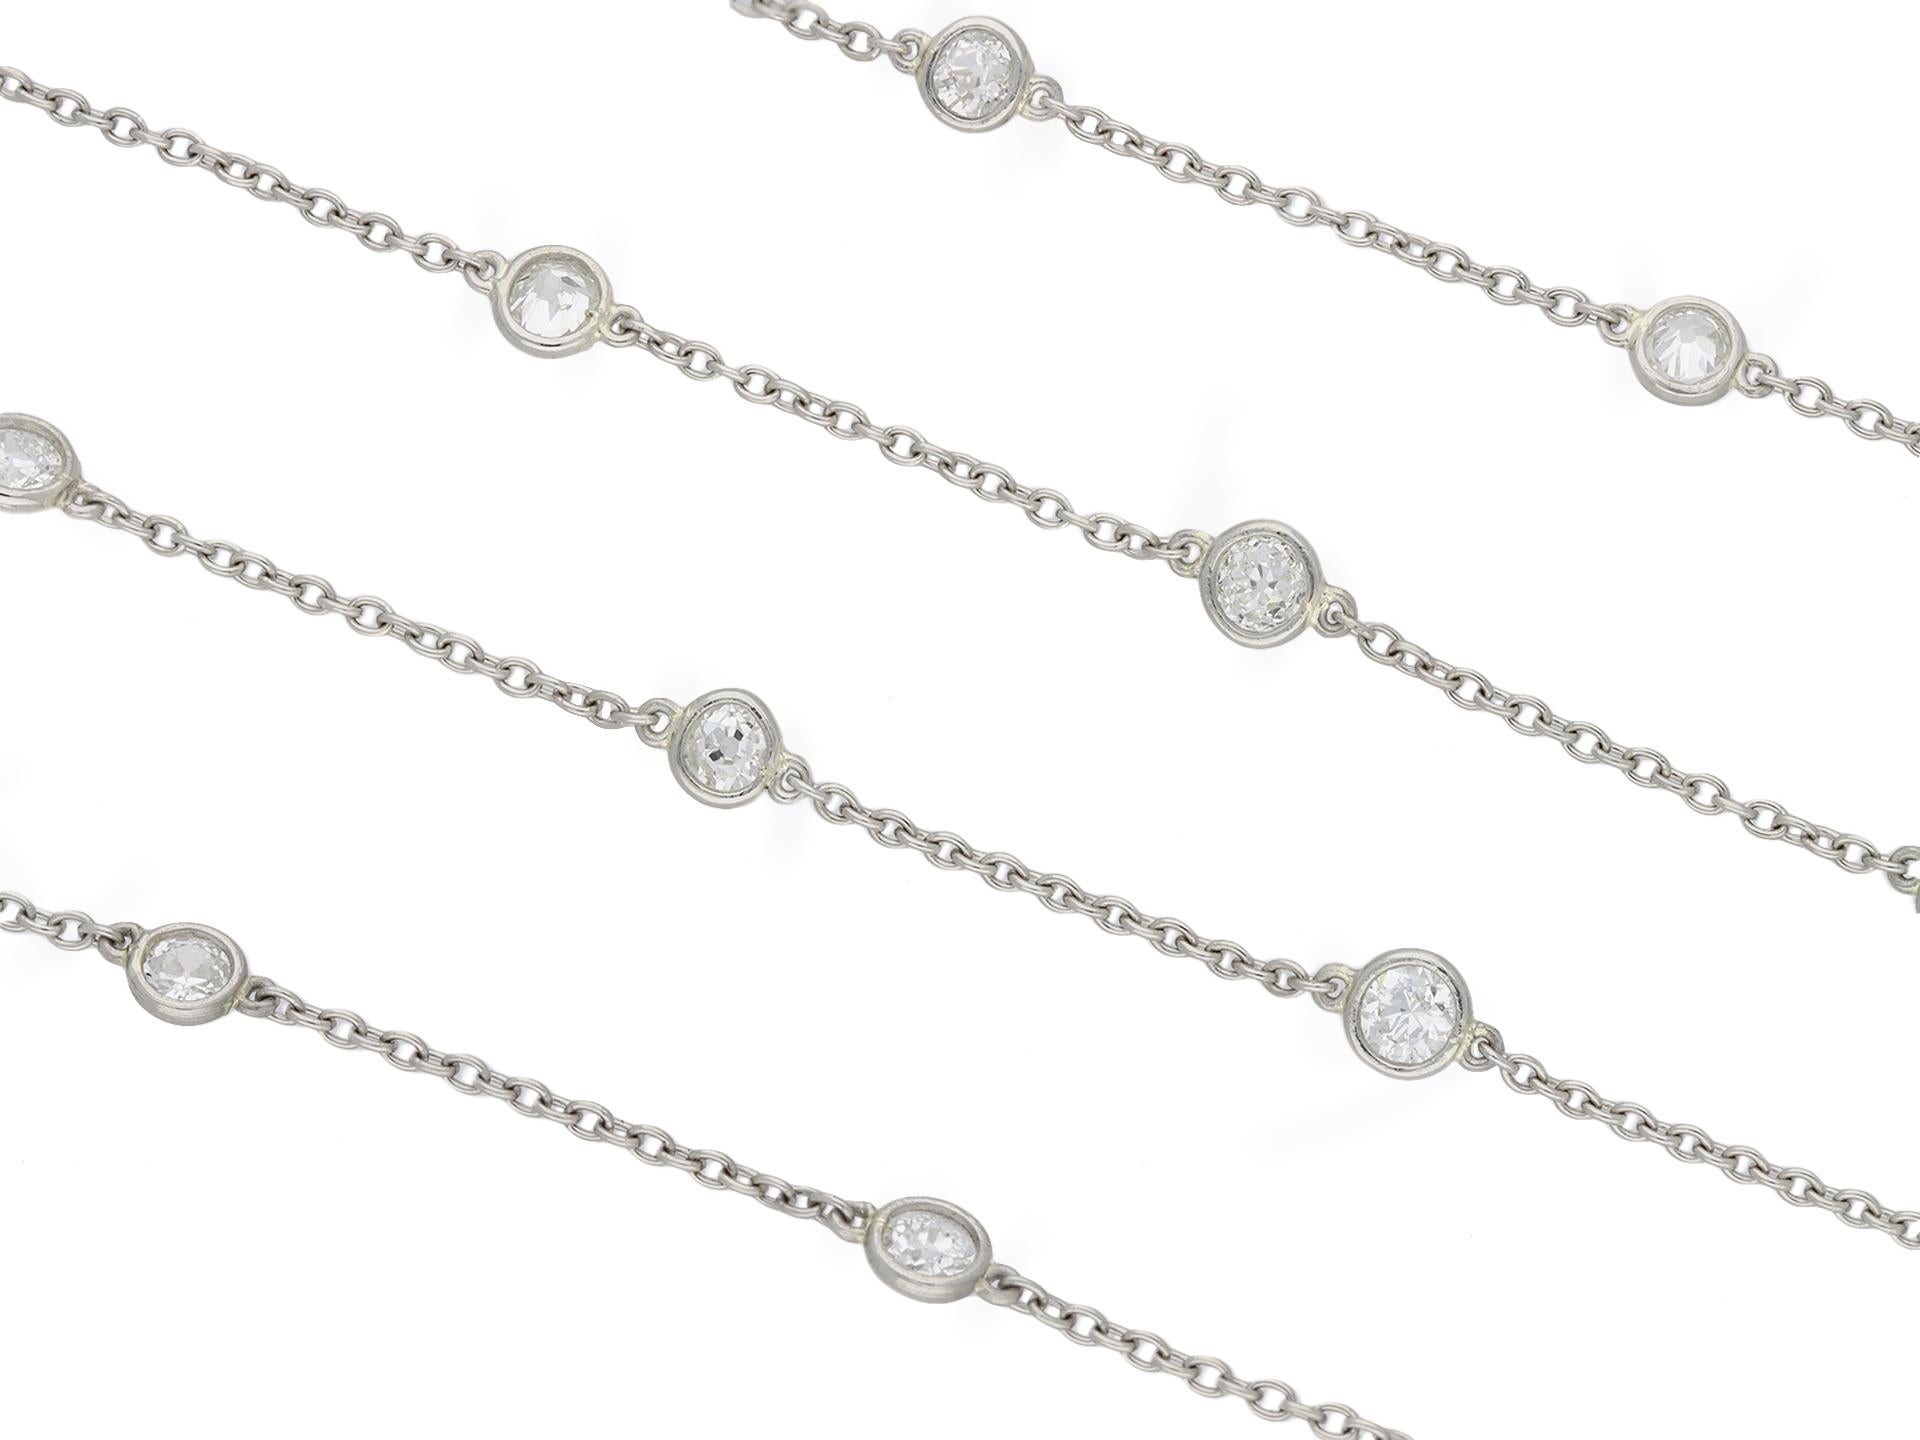 Edwardian diamond set long guard chain necklace. A platinum necklace set with fifty four round old mine diamonds in open back spectacle settings with a combined approximate weight of 7.45 carats, to an elegant long guard trace chain, composed of